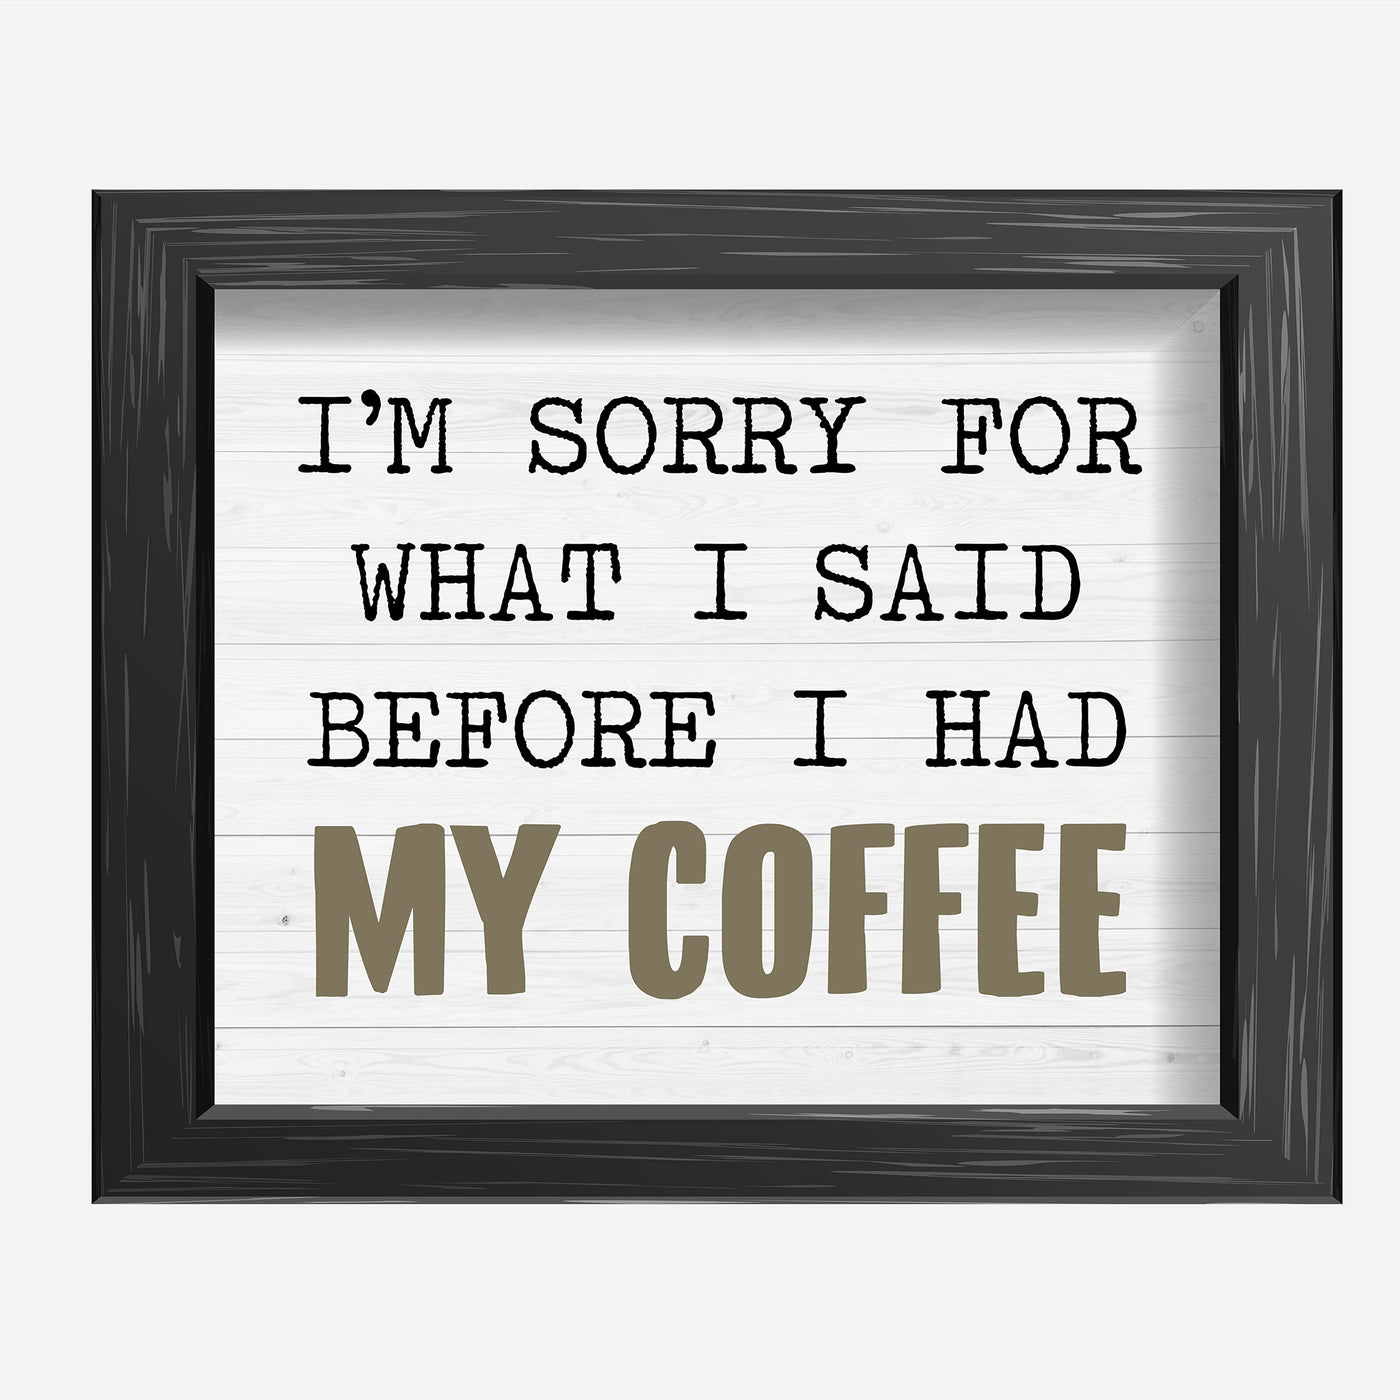 Sorry For What I Said Before I Had My Coffee Funny Wall Art-10 x 8" Typographic Art Print-Ready to Frame. Humorous Home-Kitchen-Office-Cafe-Java Bar Decor. Perfect Gift for Coffee Addicts!